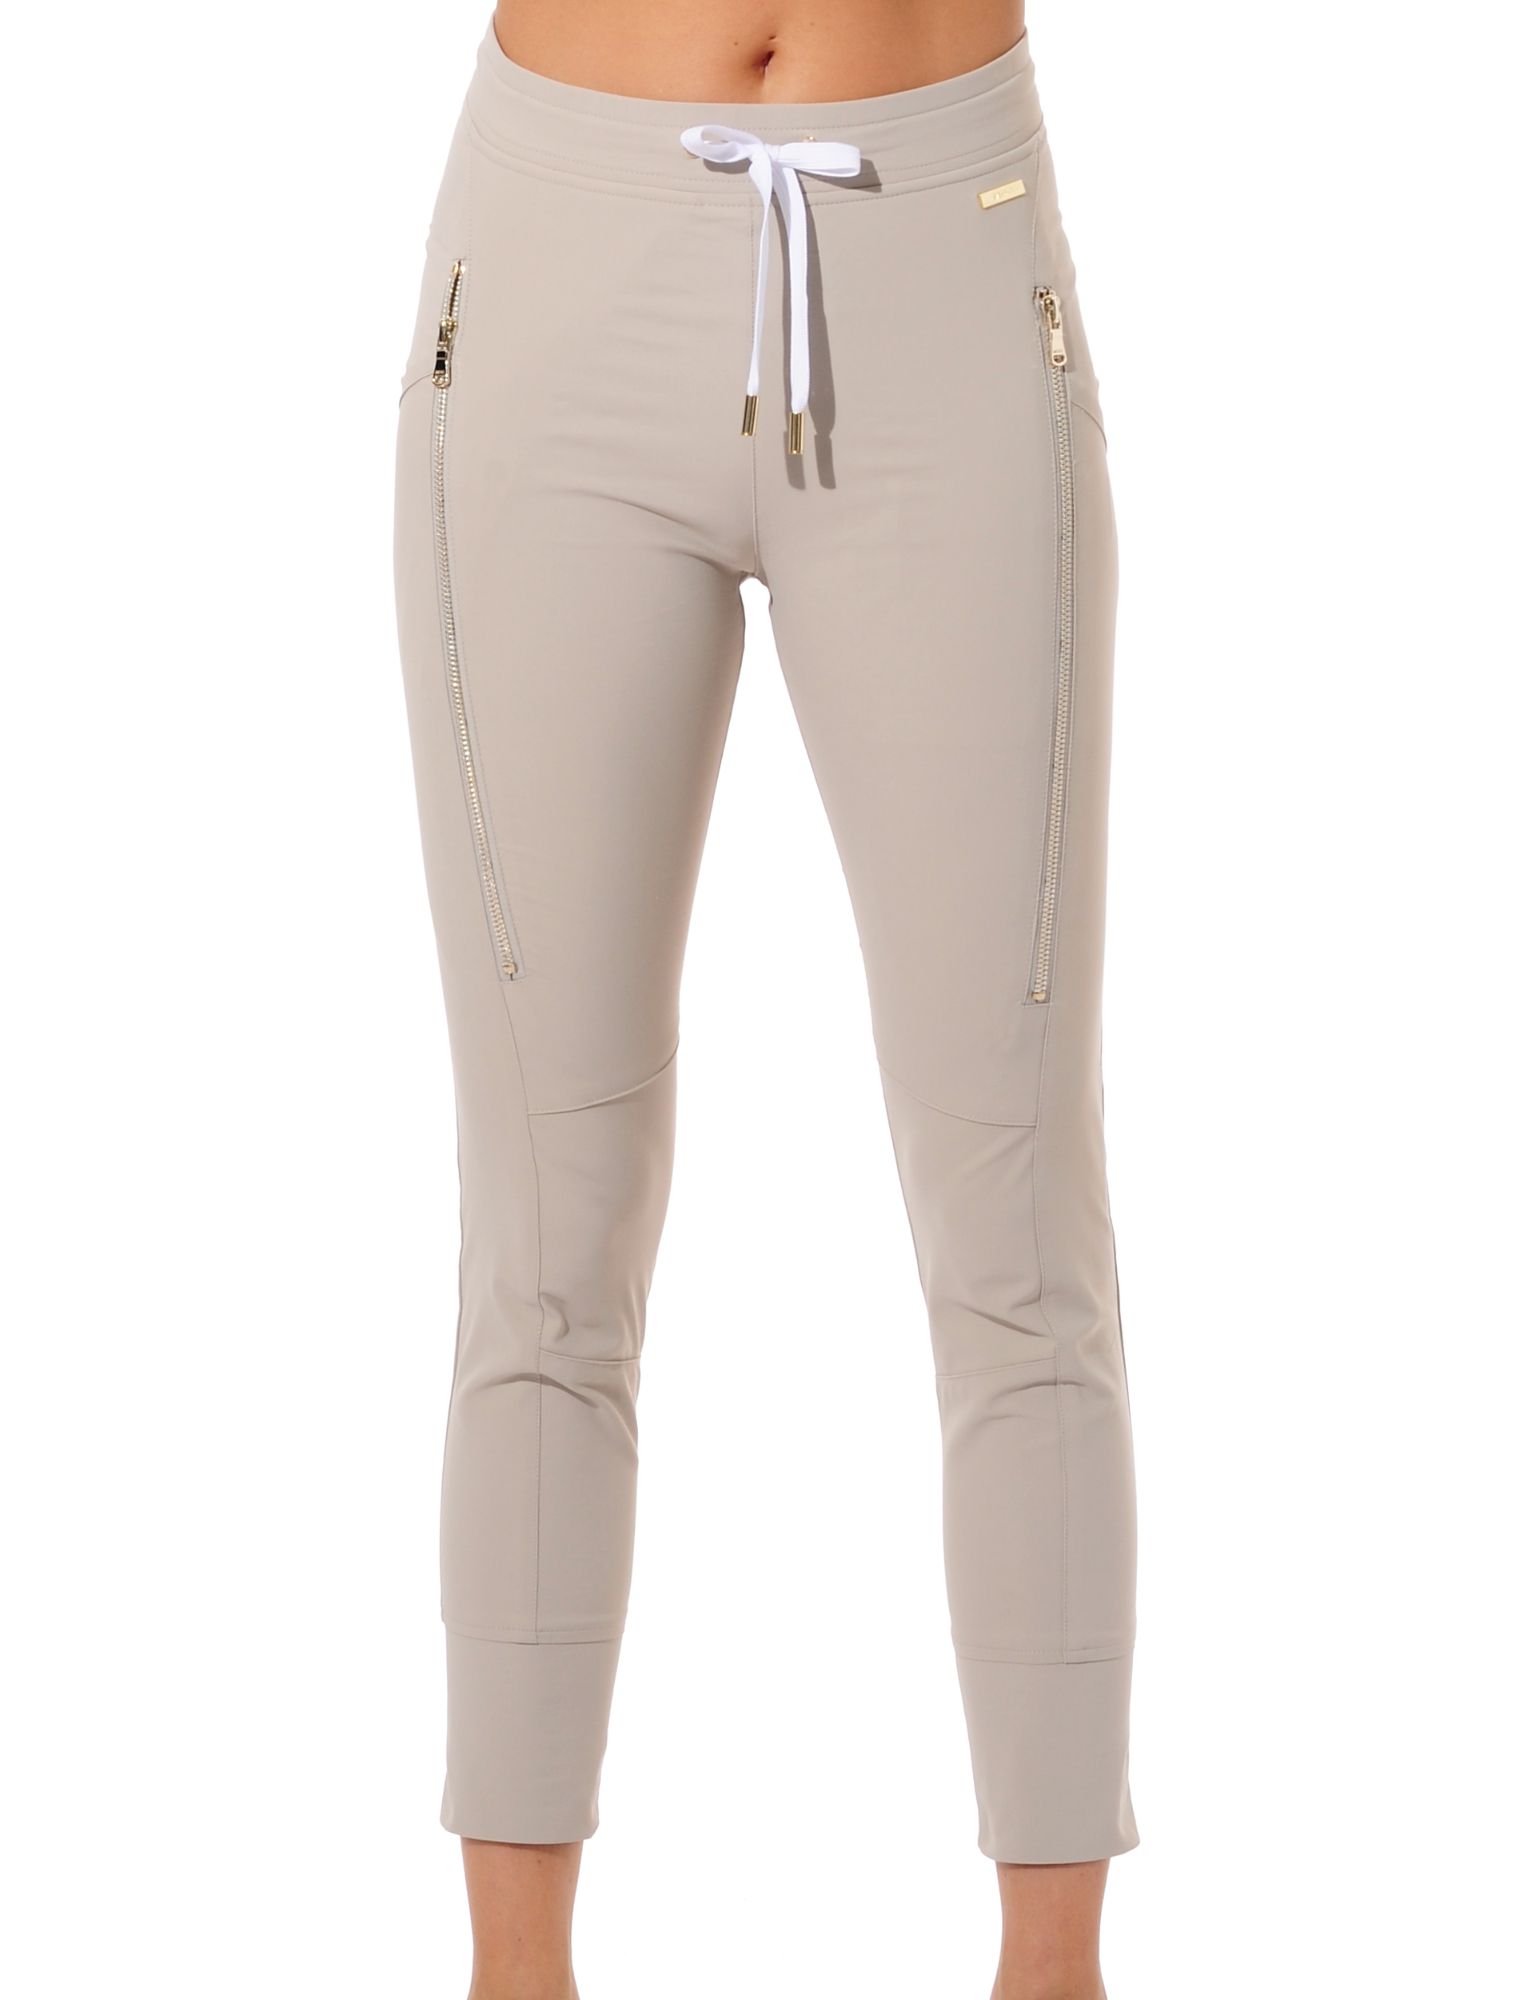 4way stretch jag pants light taupe 